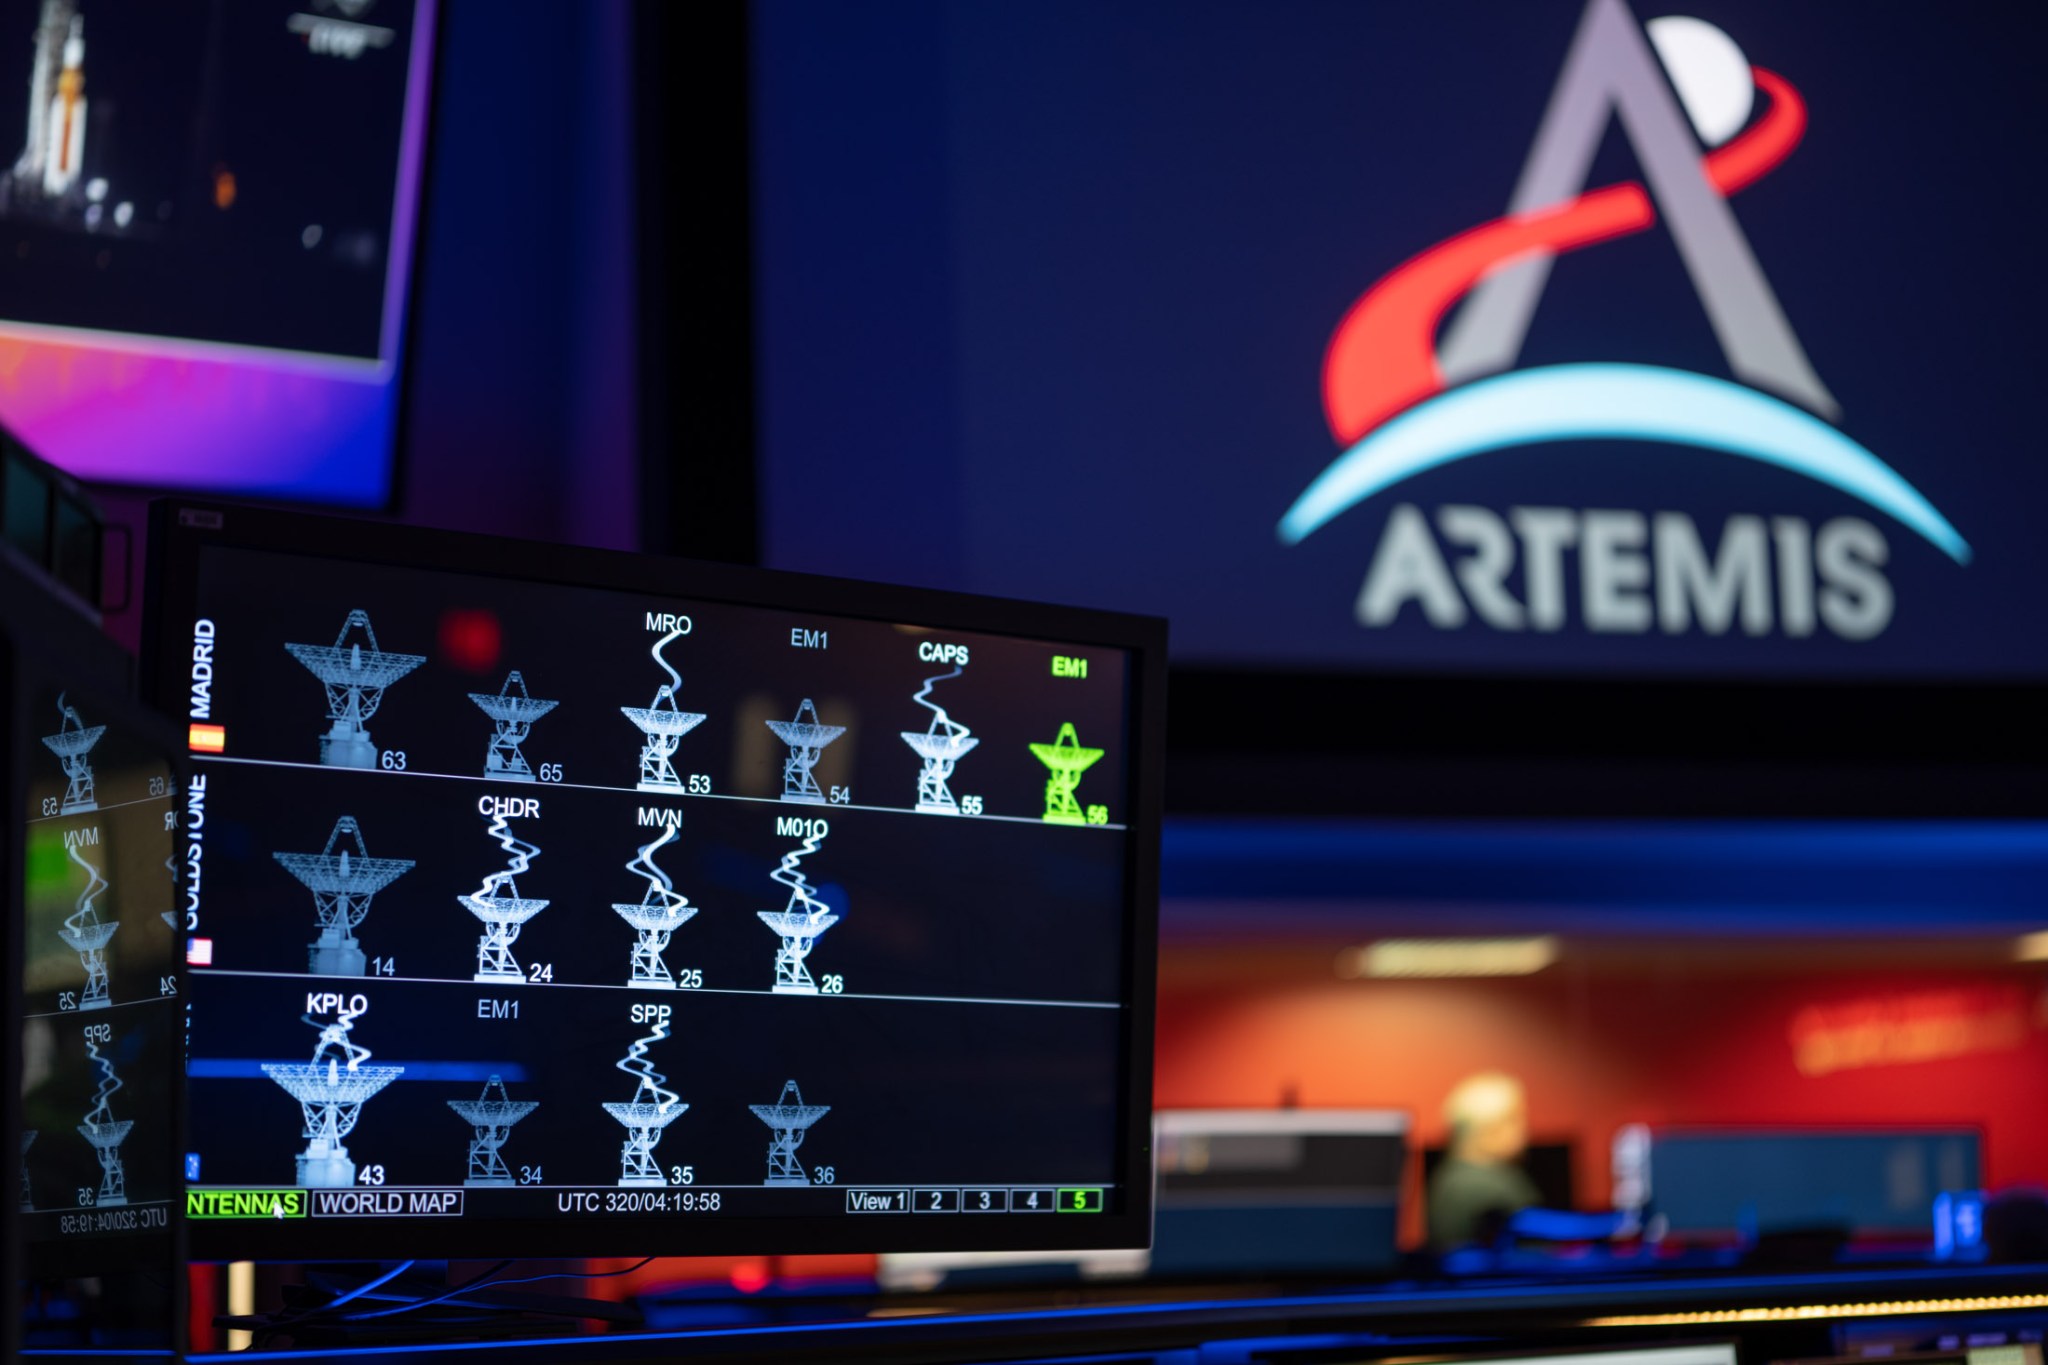 The DSN Now tool is displayed on a screen in the foreground—antenna images show real-time data provided by the Deep Space Network ground stations. The Artemis logo is seen in the background on a large screen.